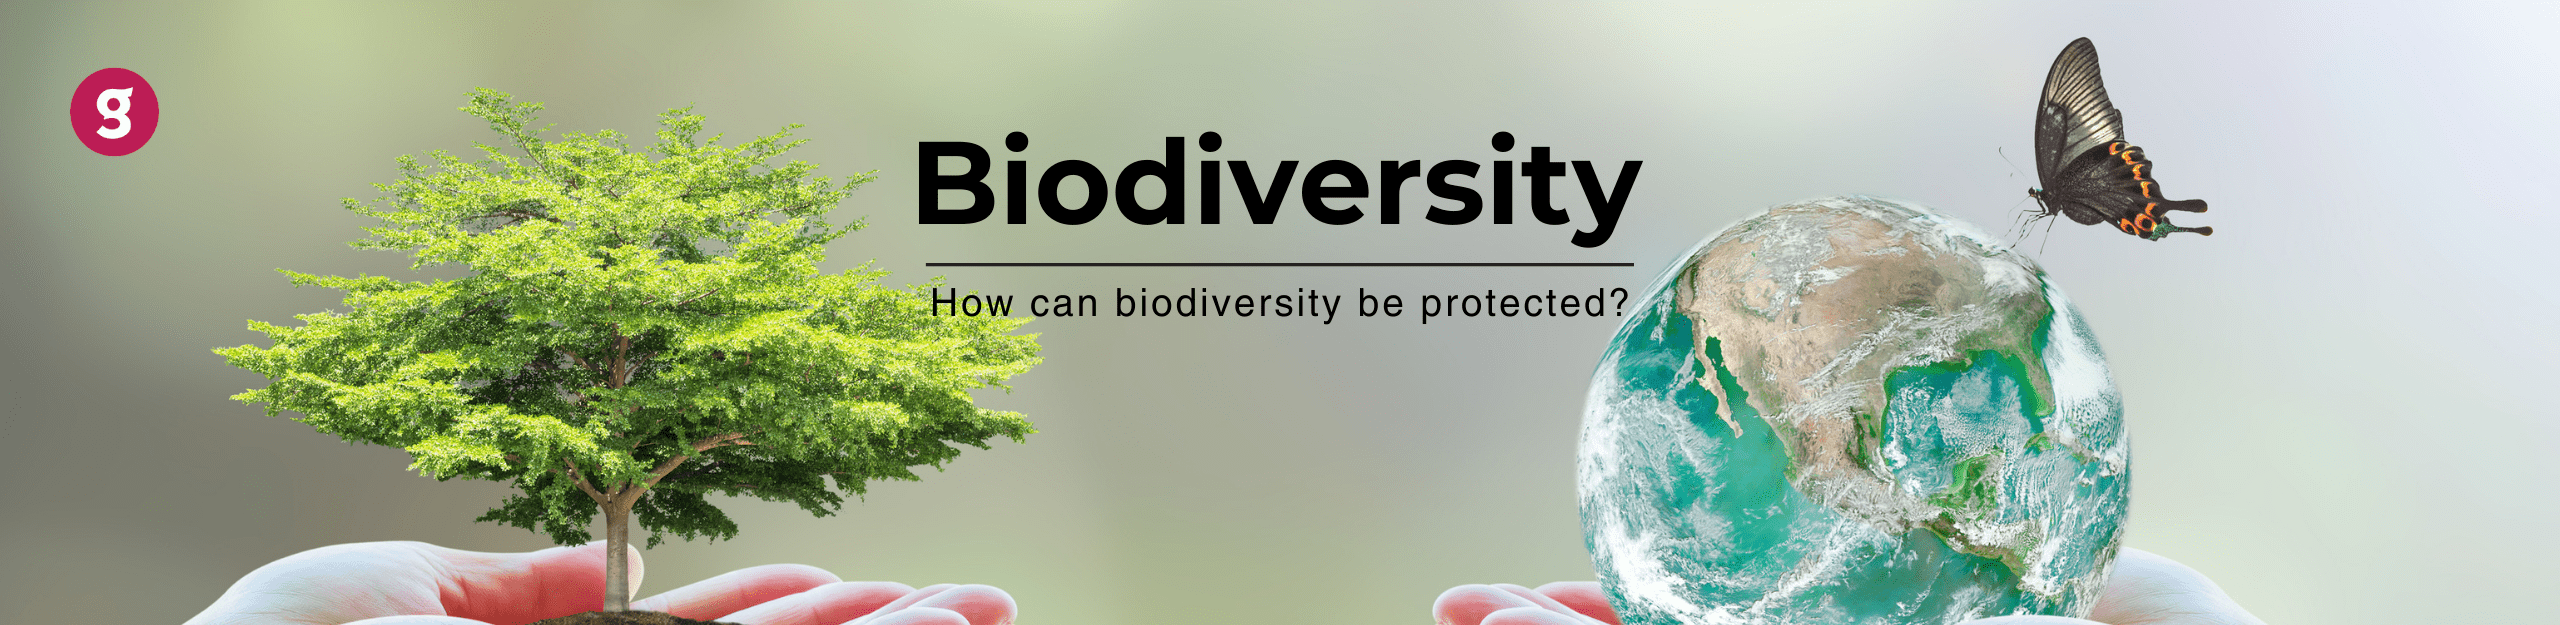 How can Biodiversity be protected